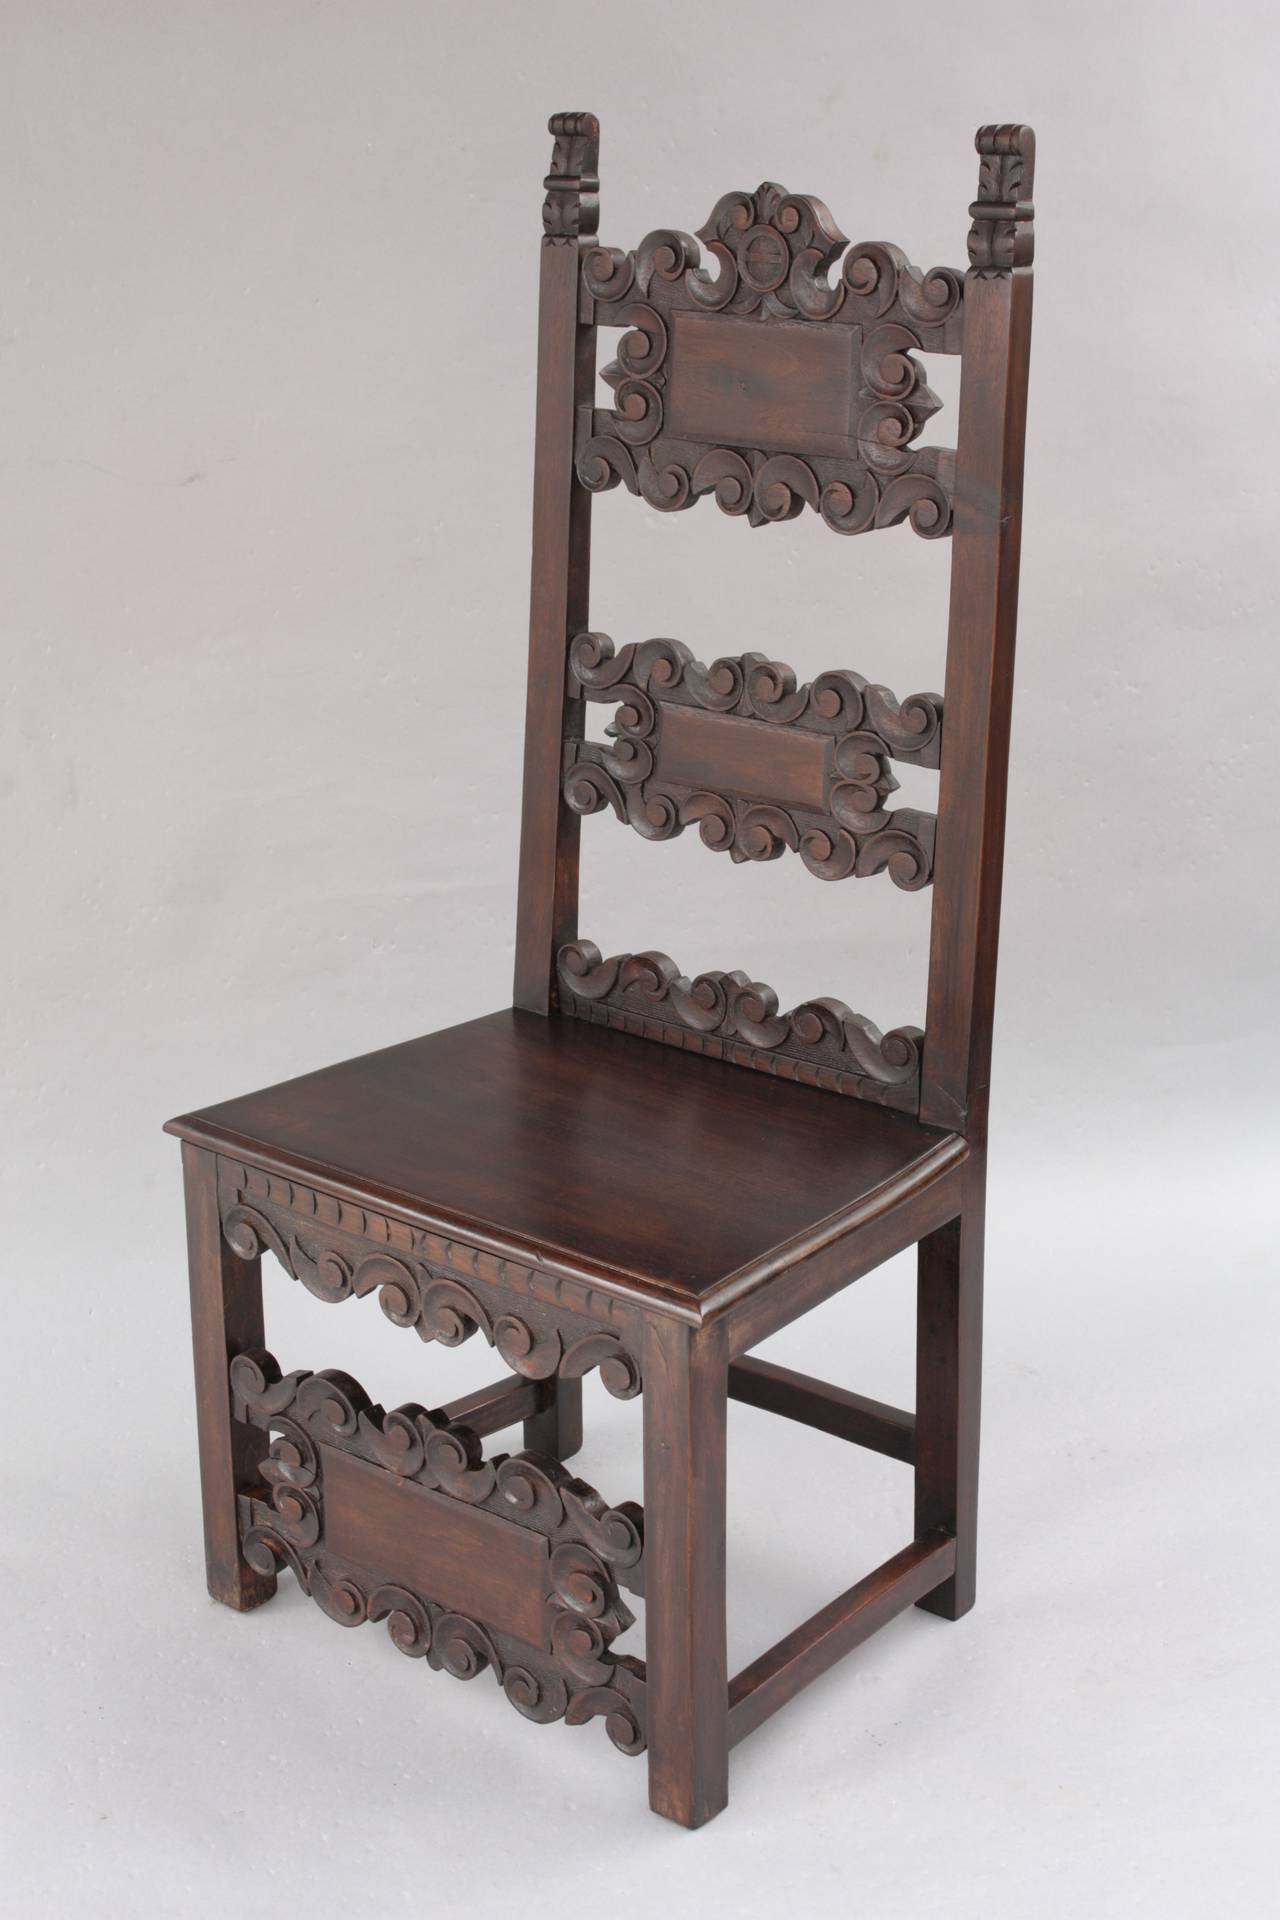 Circa 1920s carved set of four chairs. Three of the chairs have the same back railings and the other has a different back. 45.25